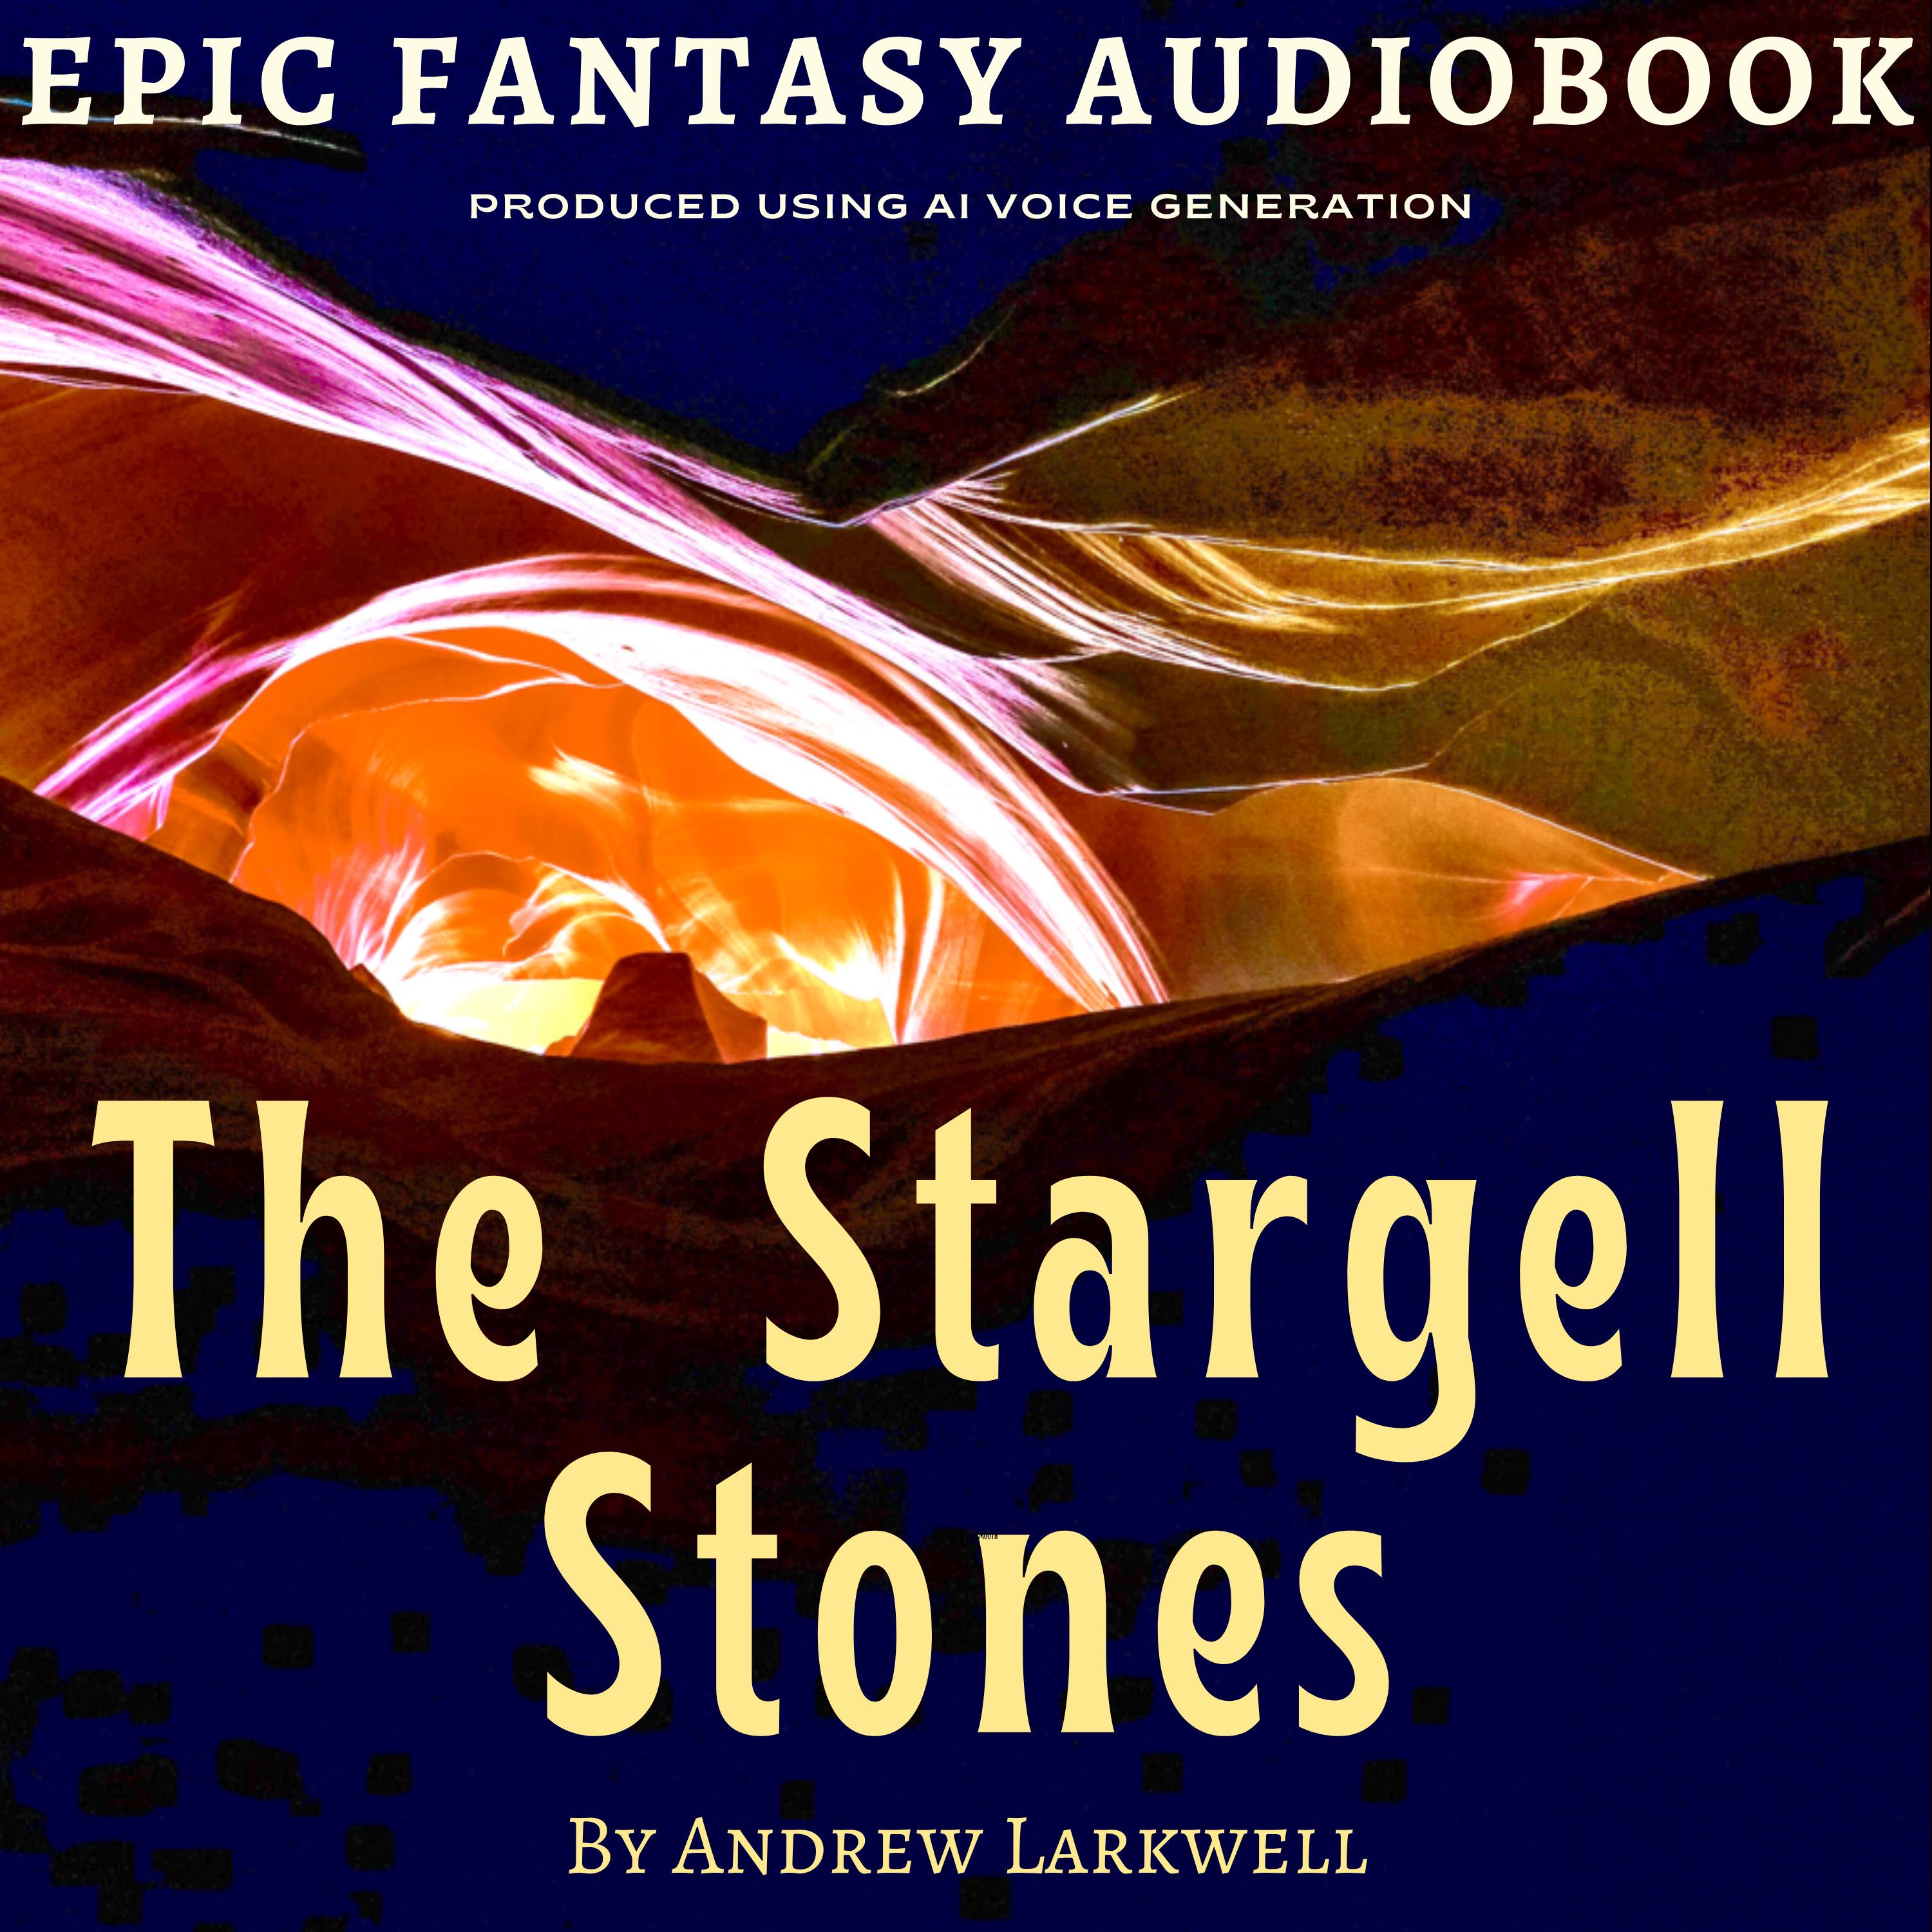 The Stargell Stones - An Epic Fantasy audiobook